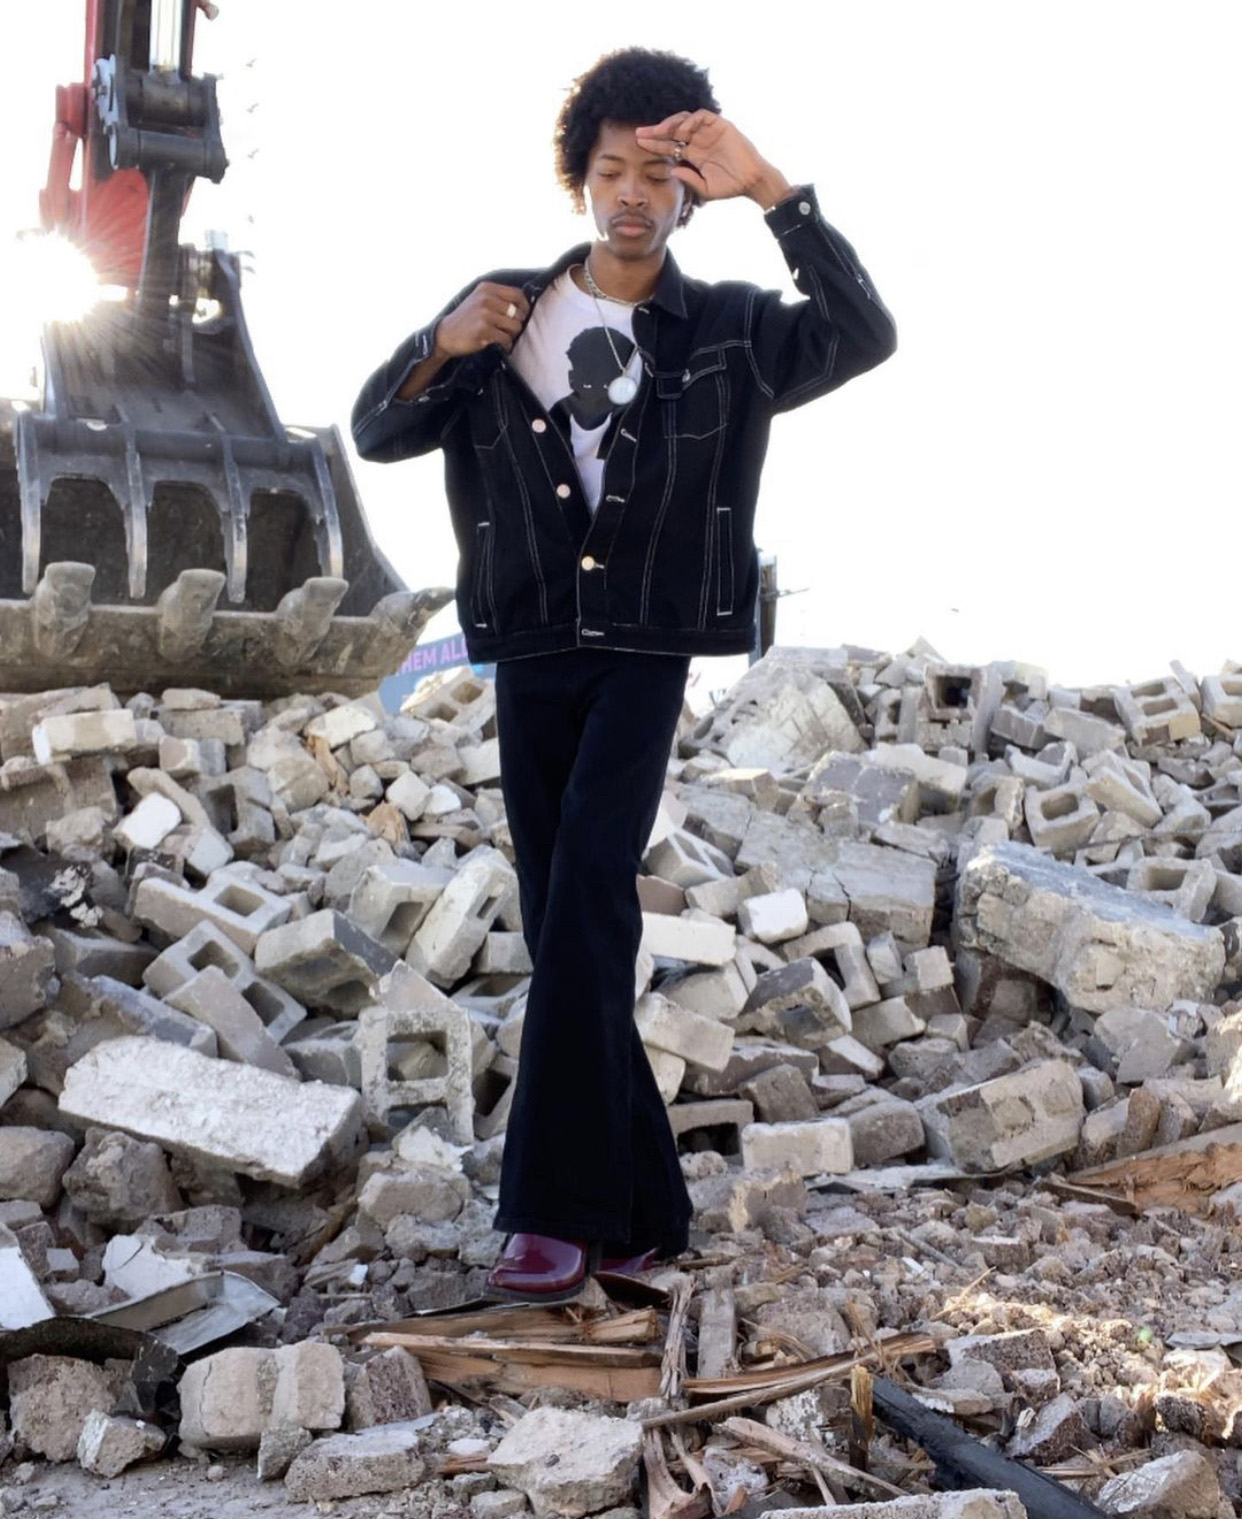 a slim man stands in front of a piece of large machinery on a pile of cinder blocks wearing a black denim jacket over a white t-shirt, black flared pants and burgundy boots